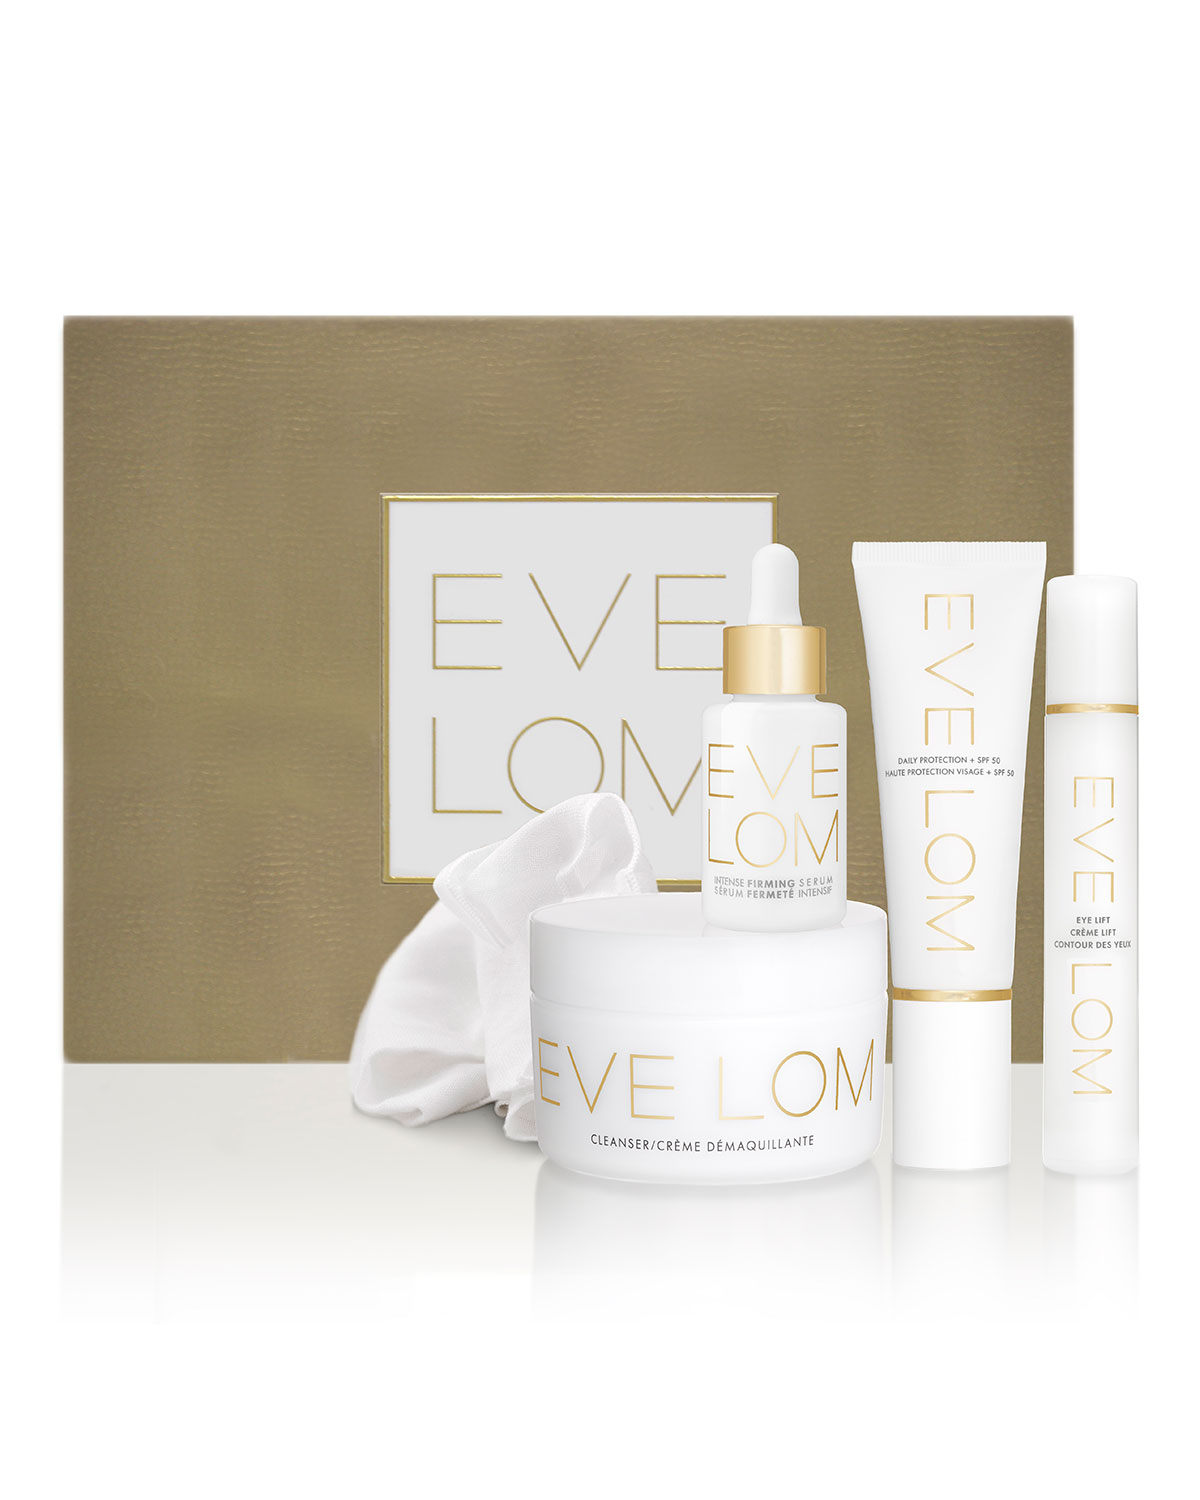 Eve Lom Limited Edition The Icons Holiday Set ($395 Value) serapportantà Eve Lom Gift Sets 